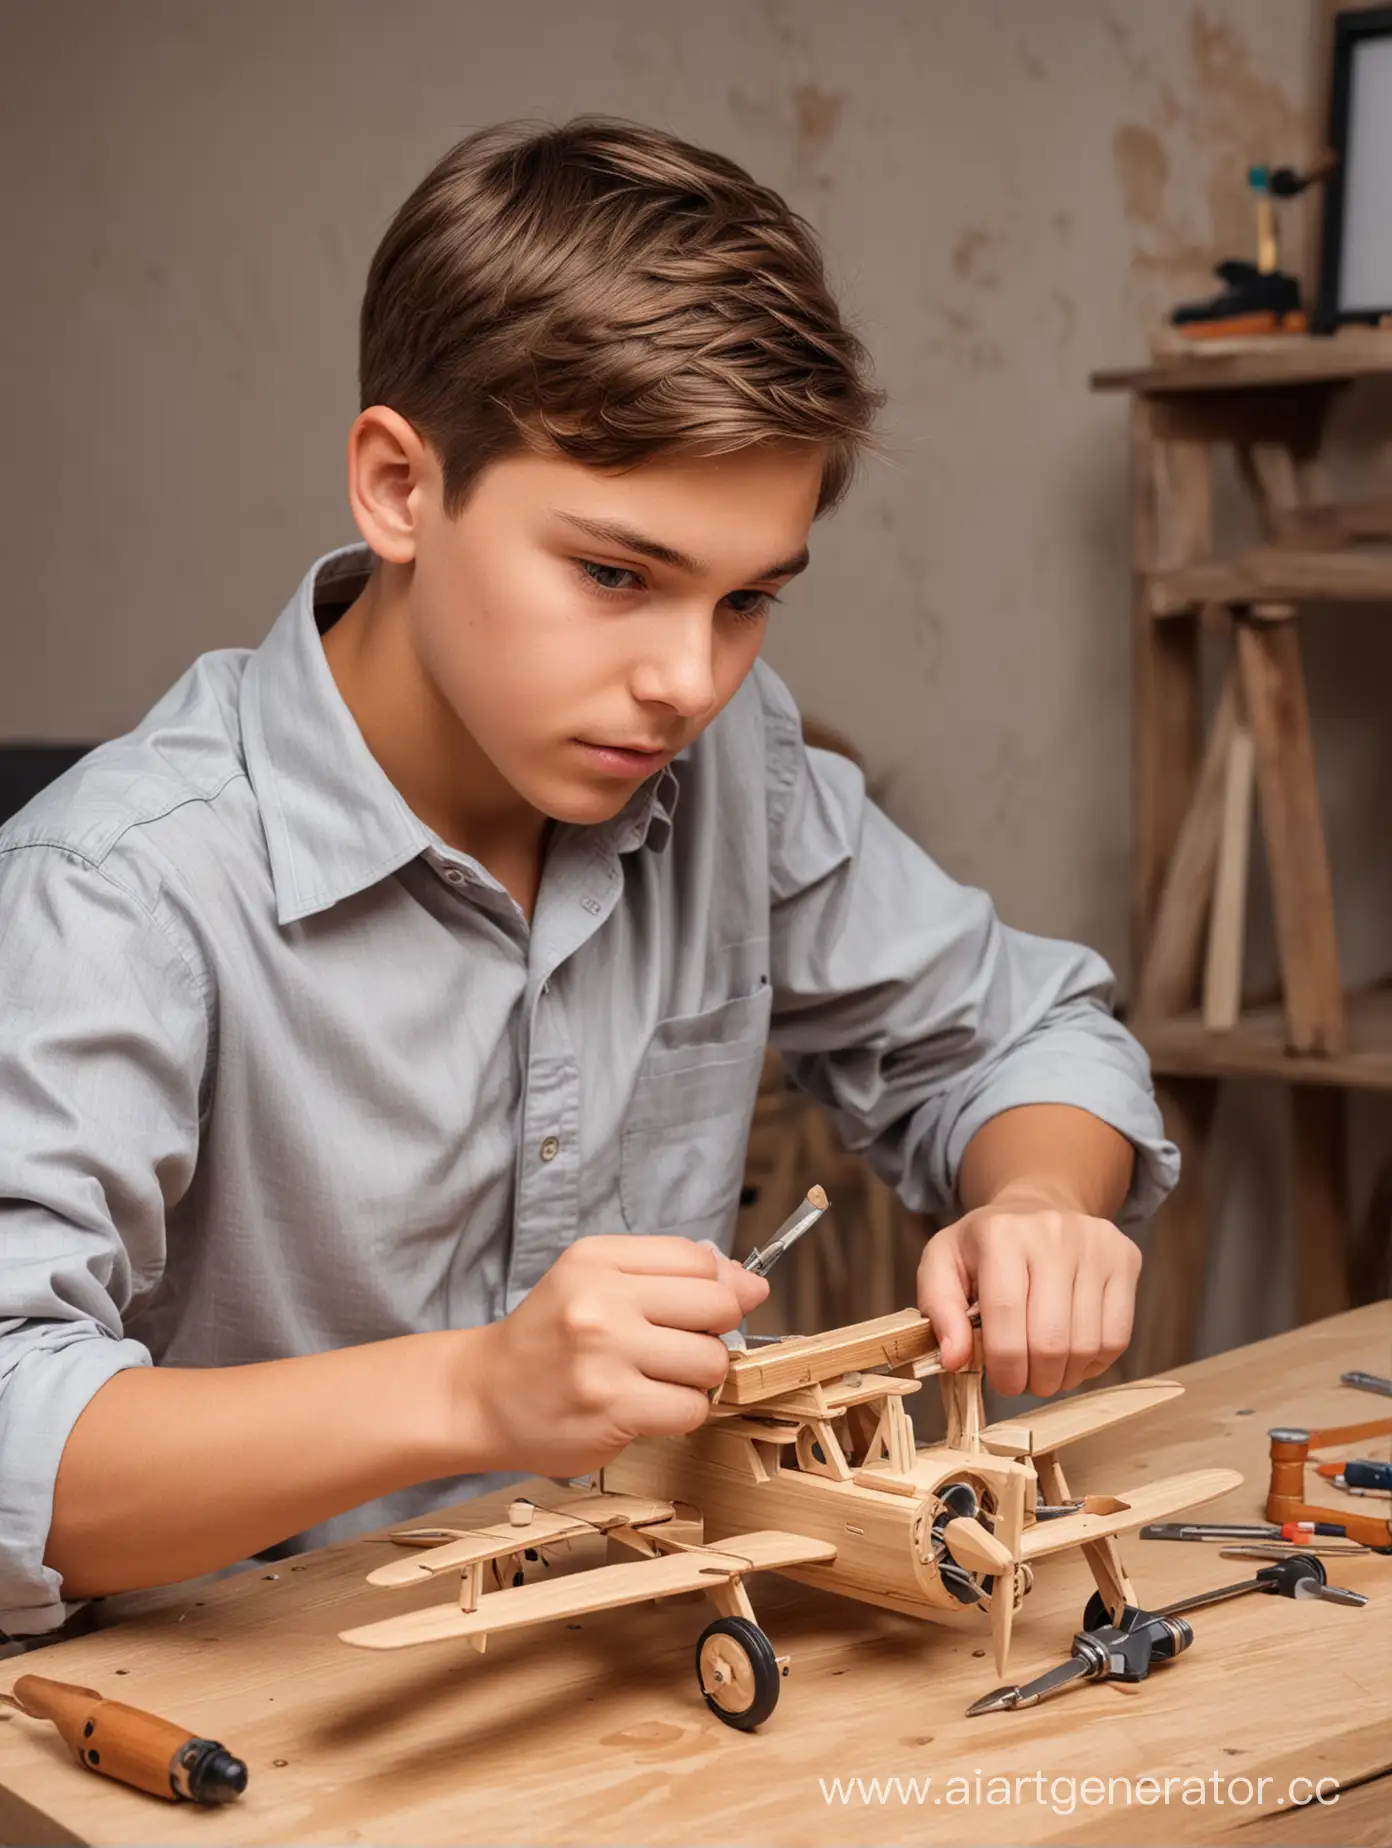 Young-Boy-Assembling-Wooden-Airplane-with-Screwdriver